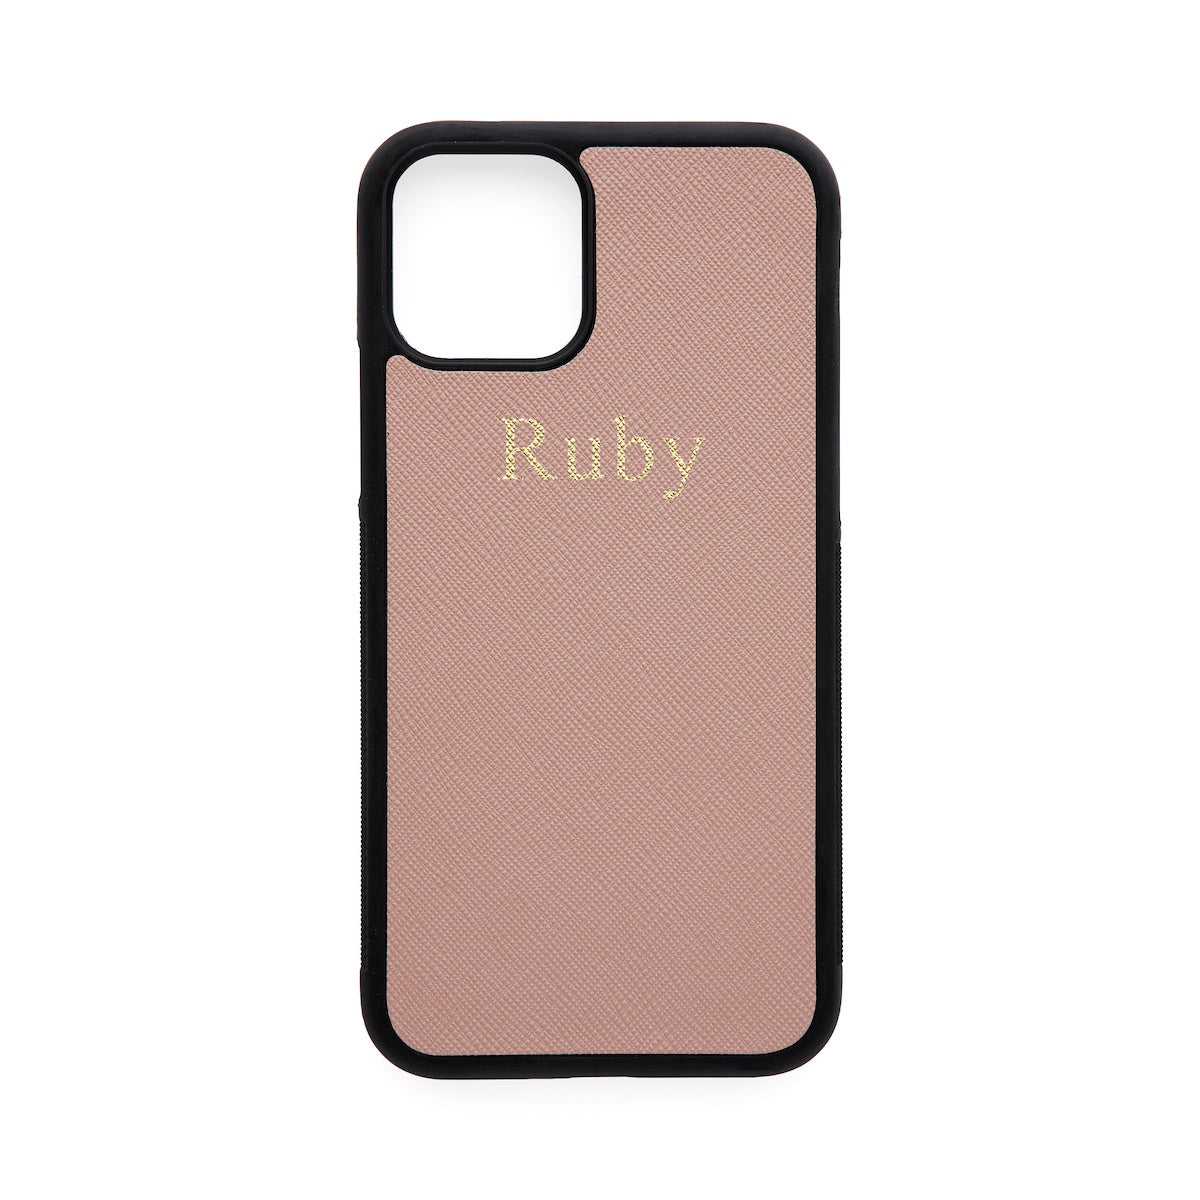 iPhone 11 Pro Case - Taupe